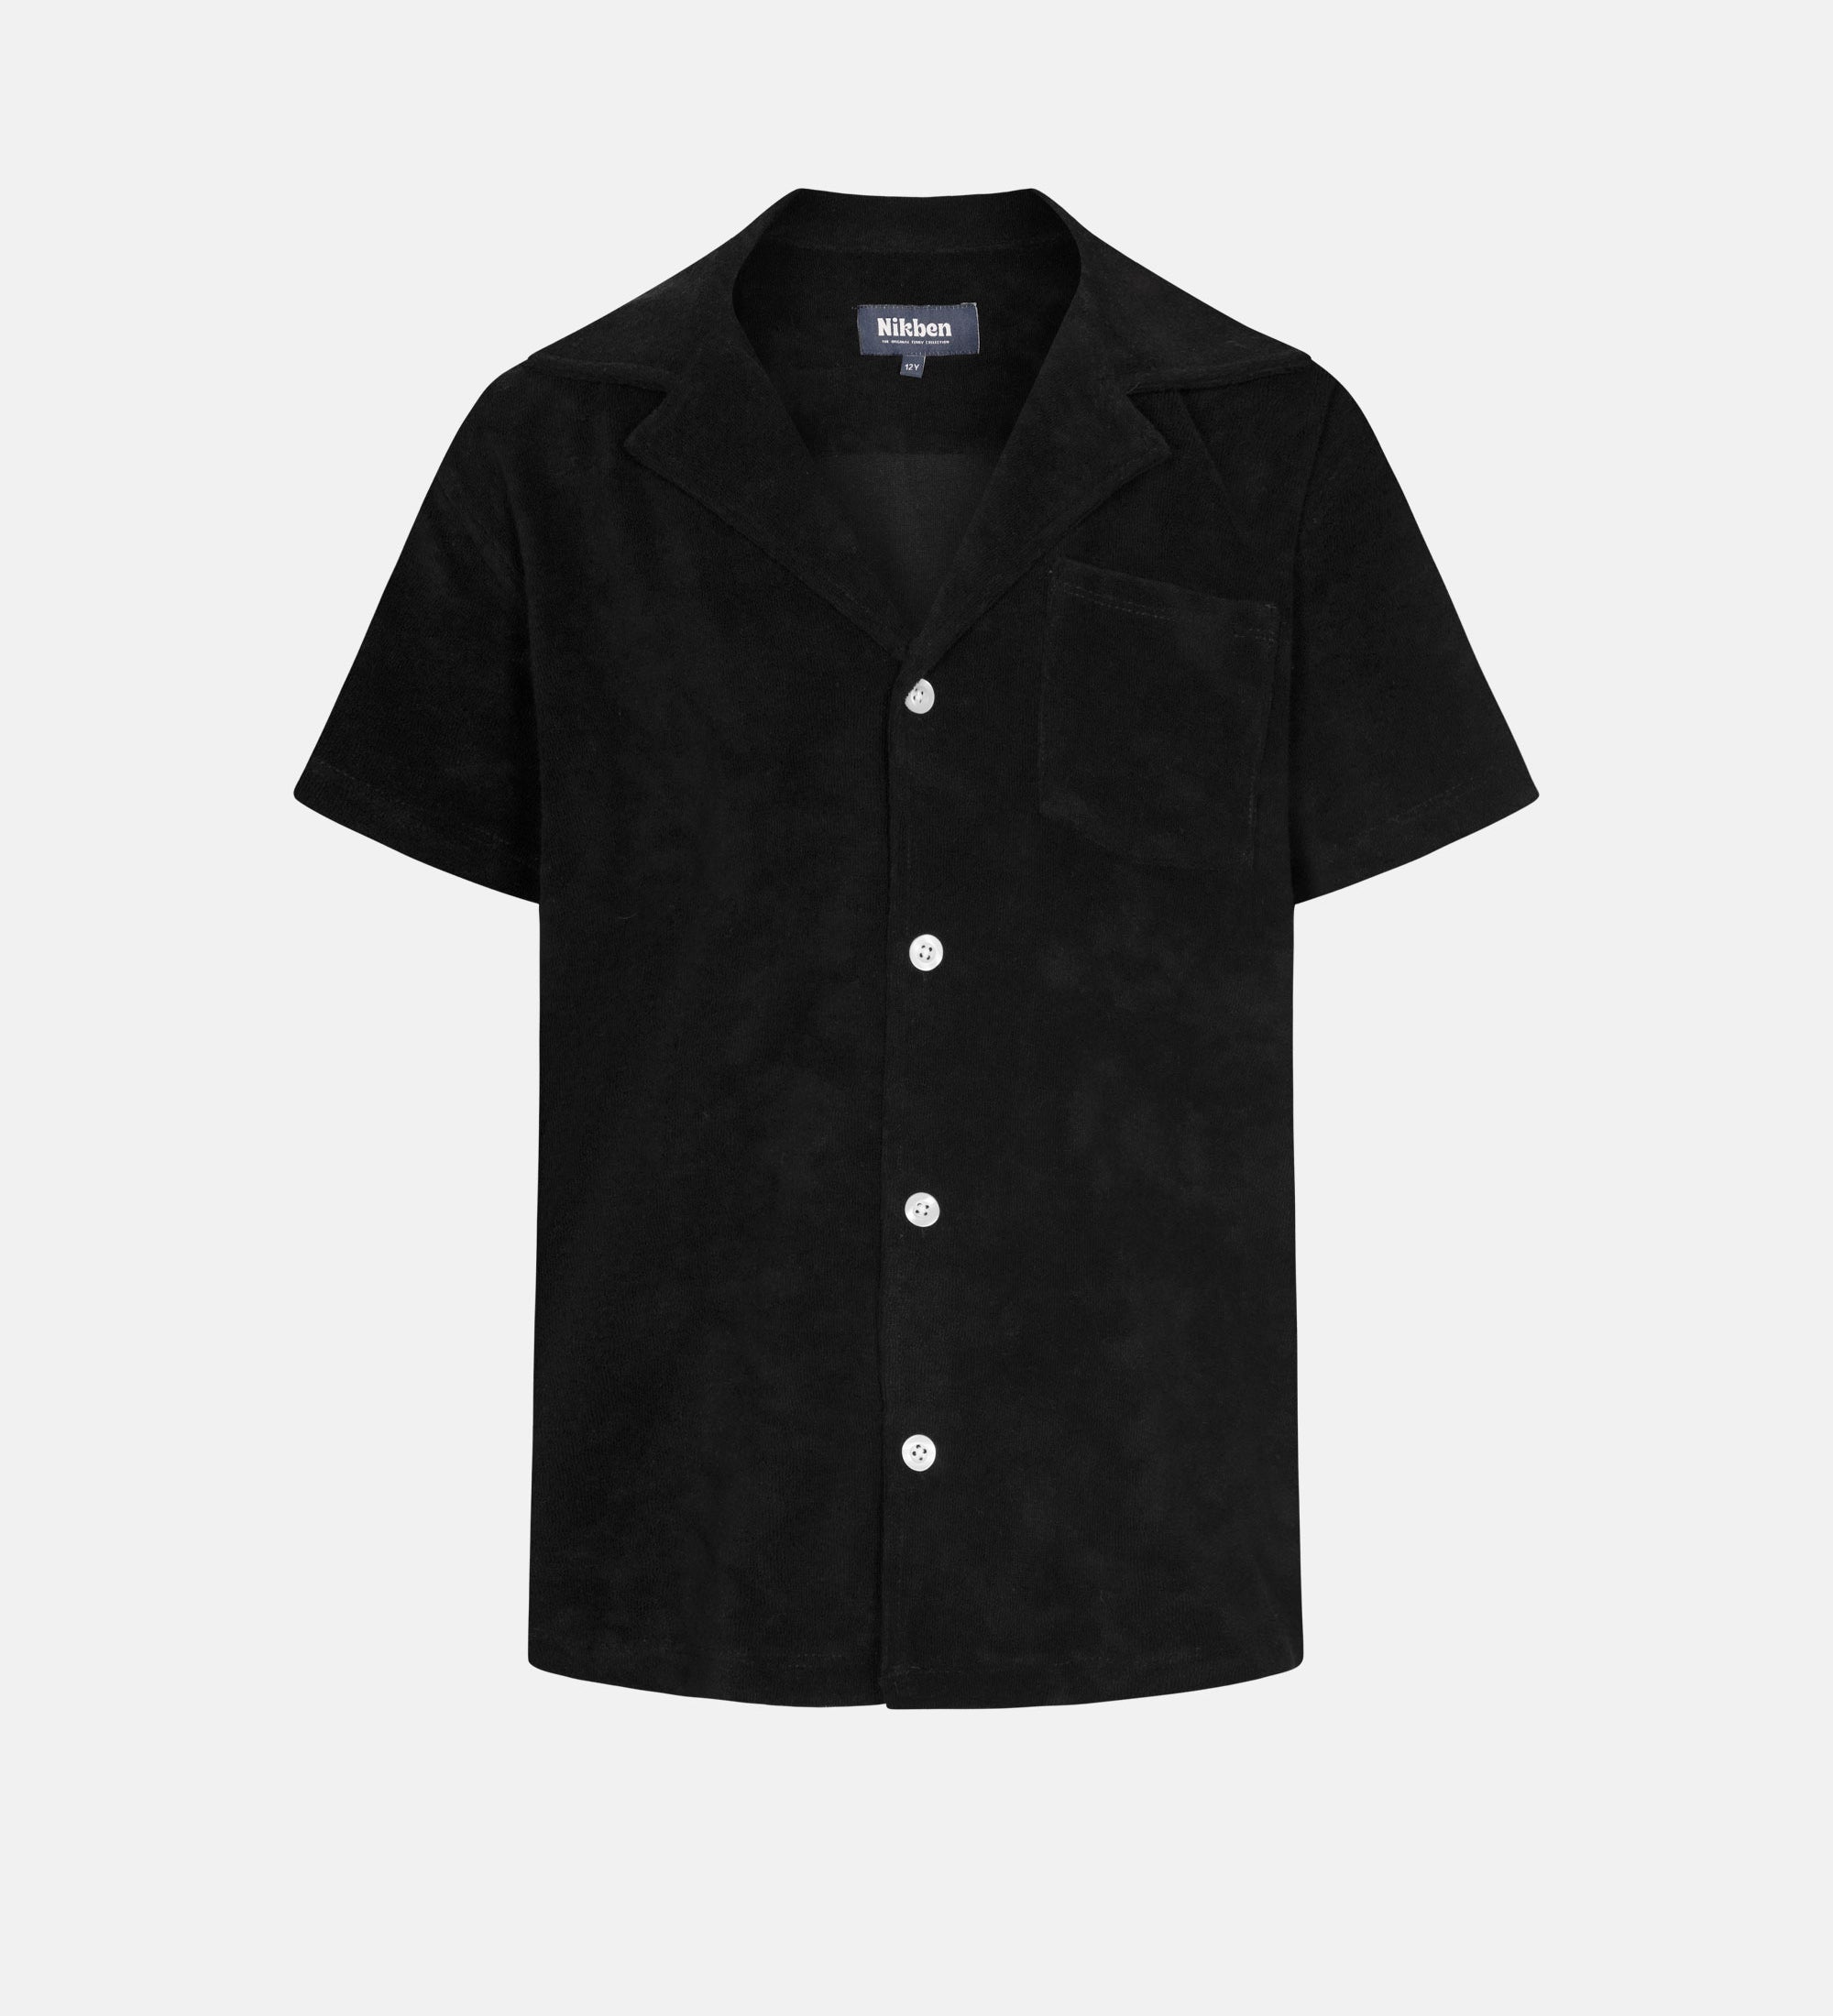 Black short sleeve shirt for kids with white button closure and one chest pocket